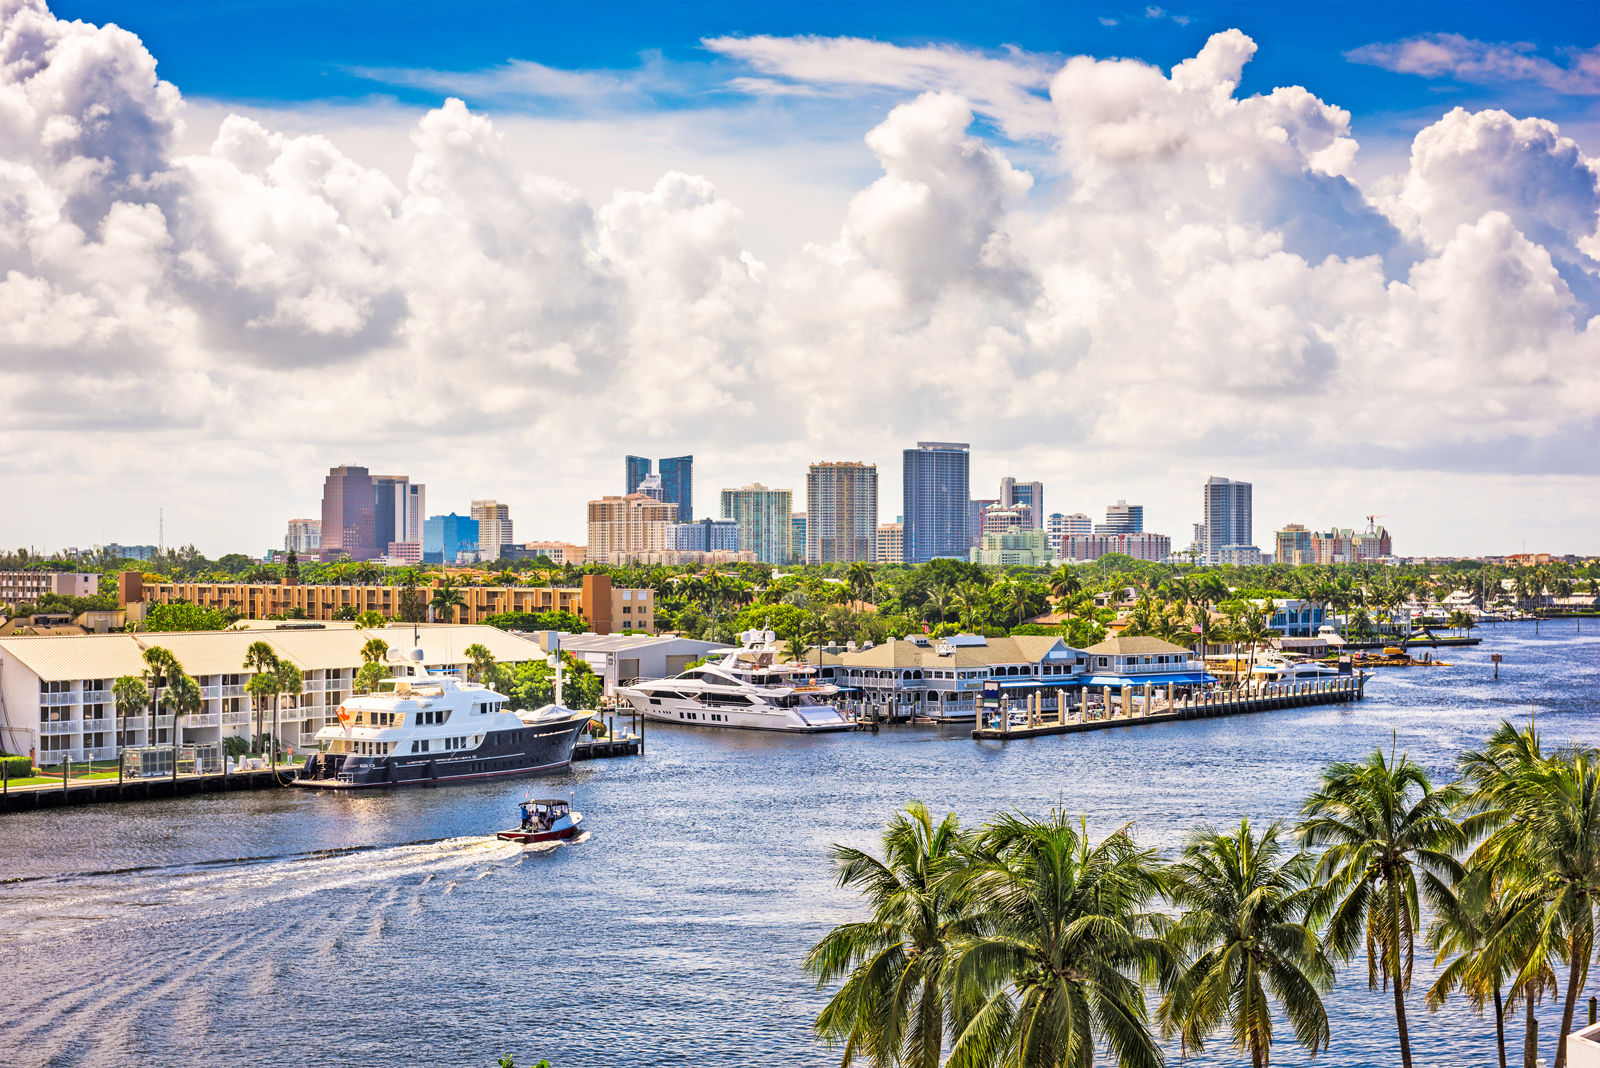 A one-way ticket to Fort Lauderdale, Florida, starts at just $79 from all three D.C. area airports. (Thinkstock)